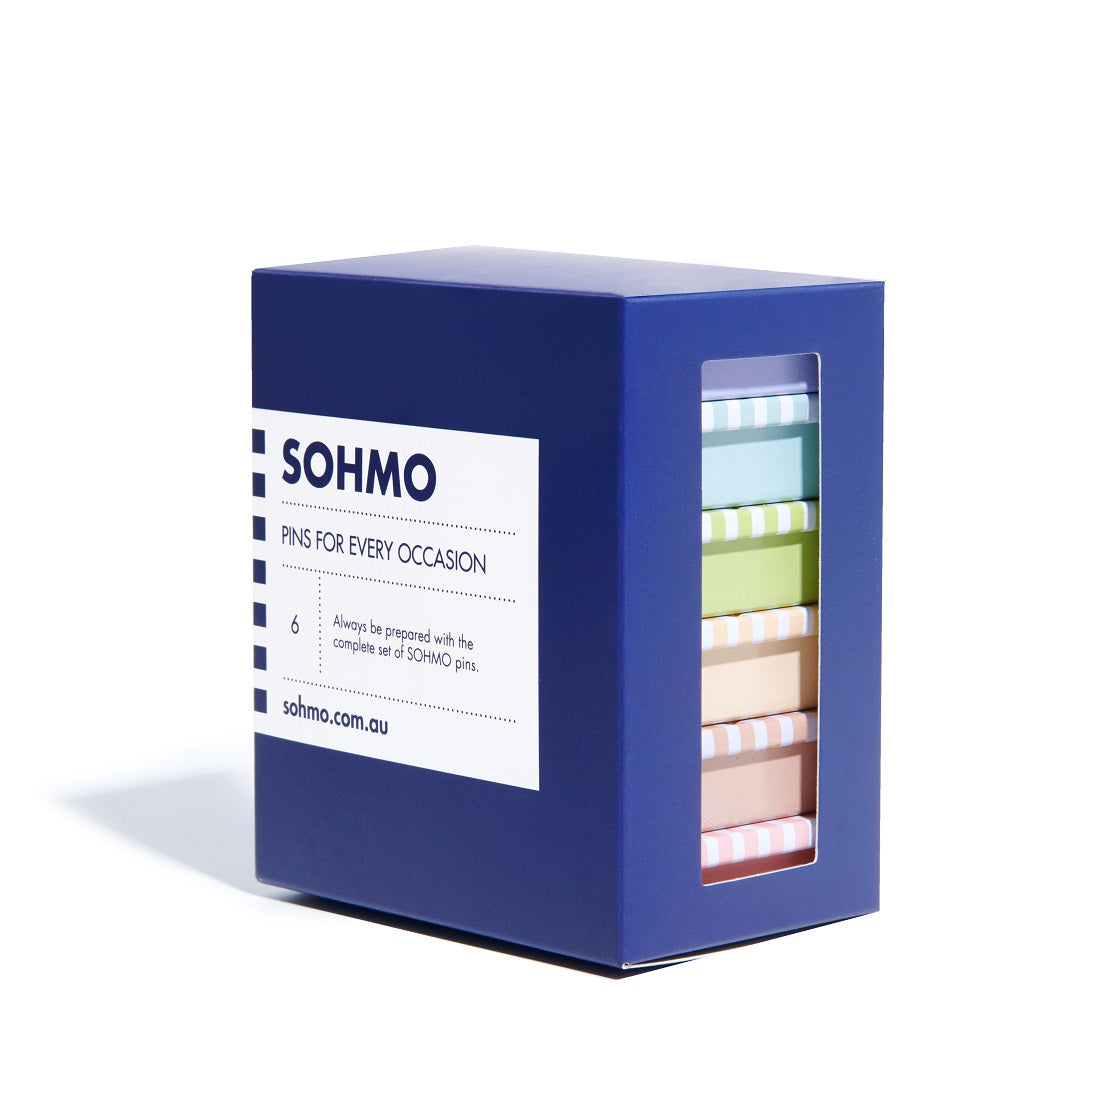 SOHMO Pins for Every Occasion Gift Box